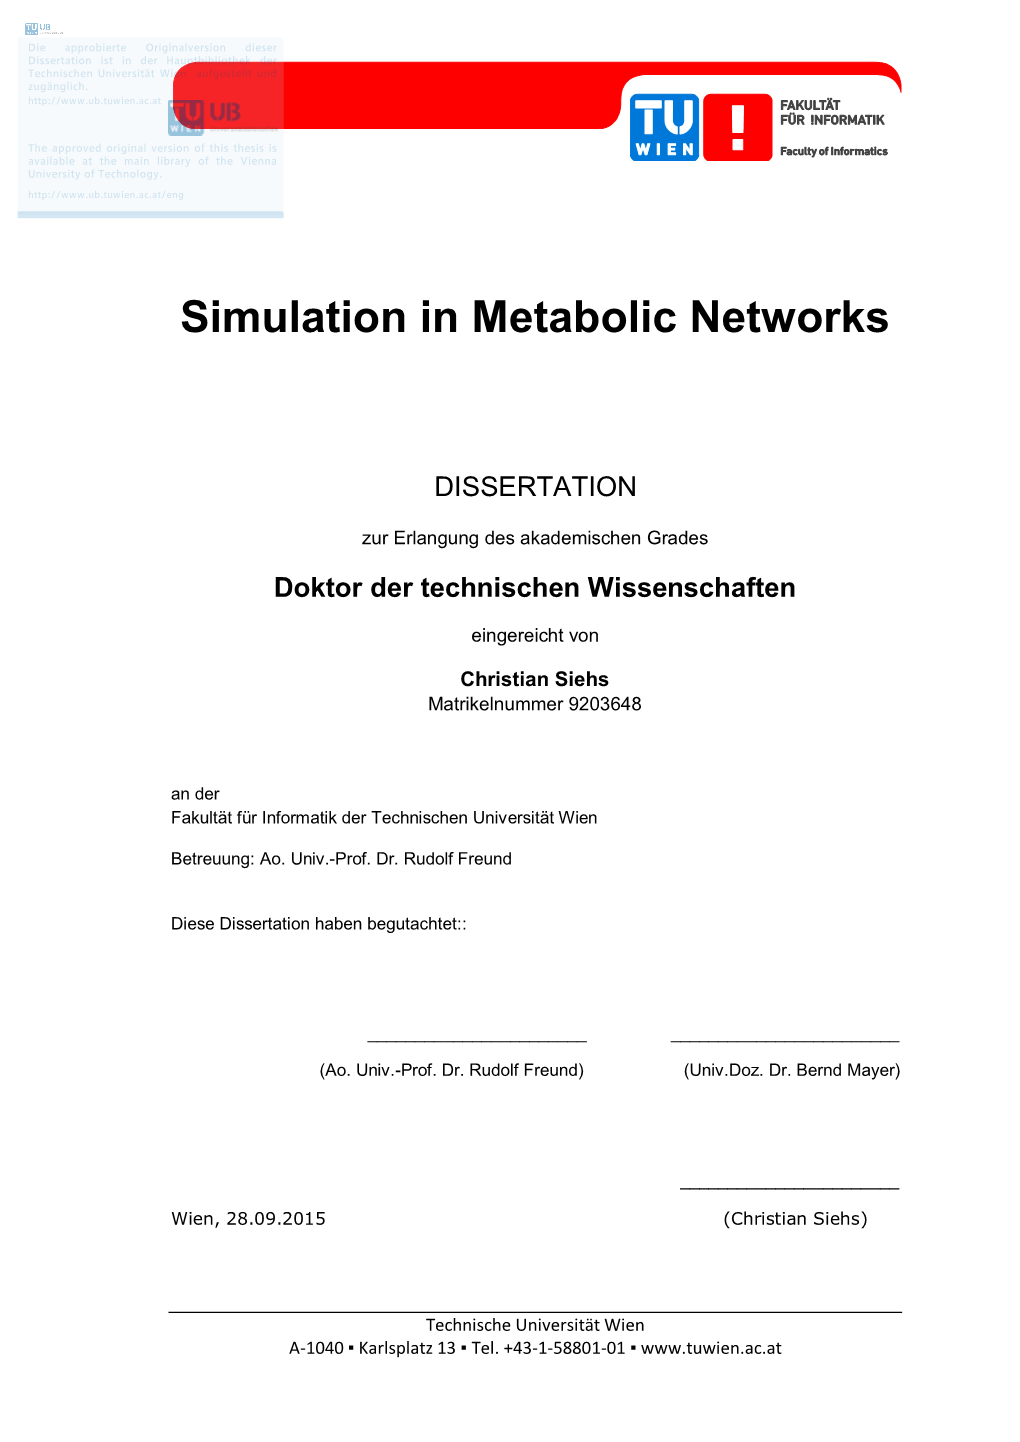 Simulation in Metabolic Networks